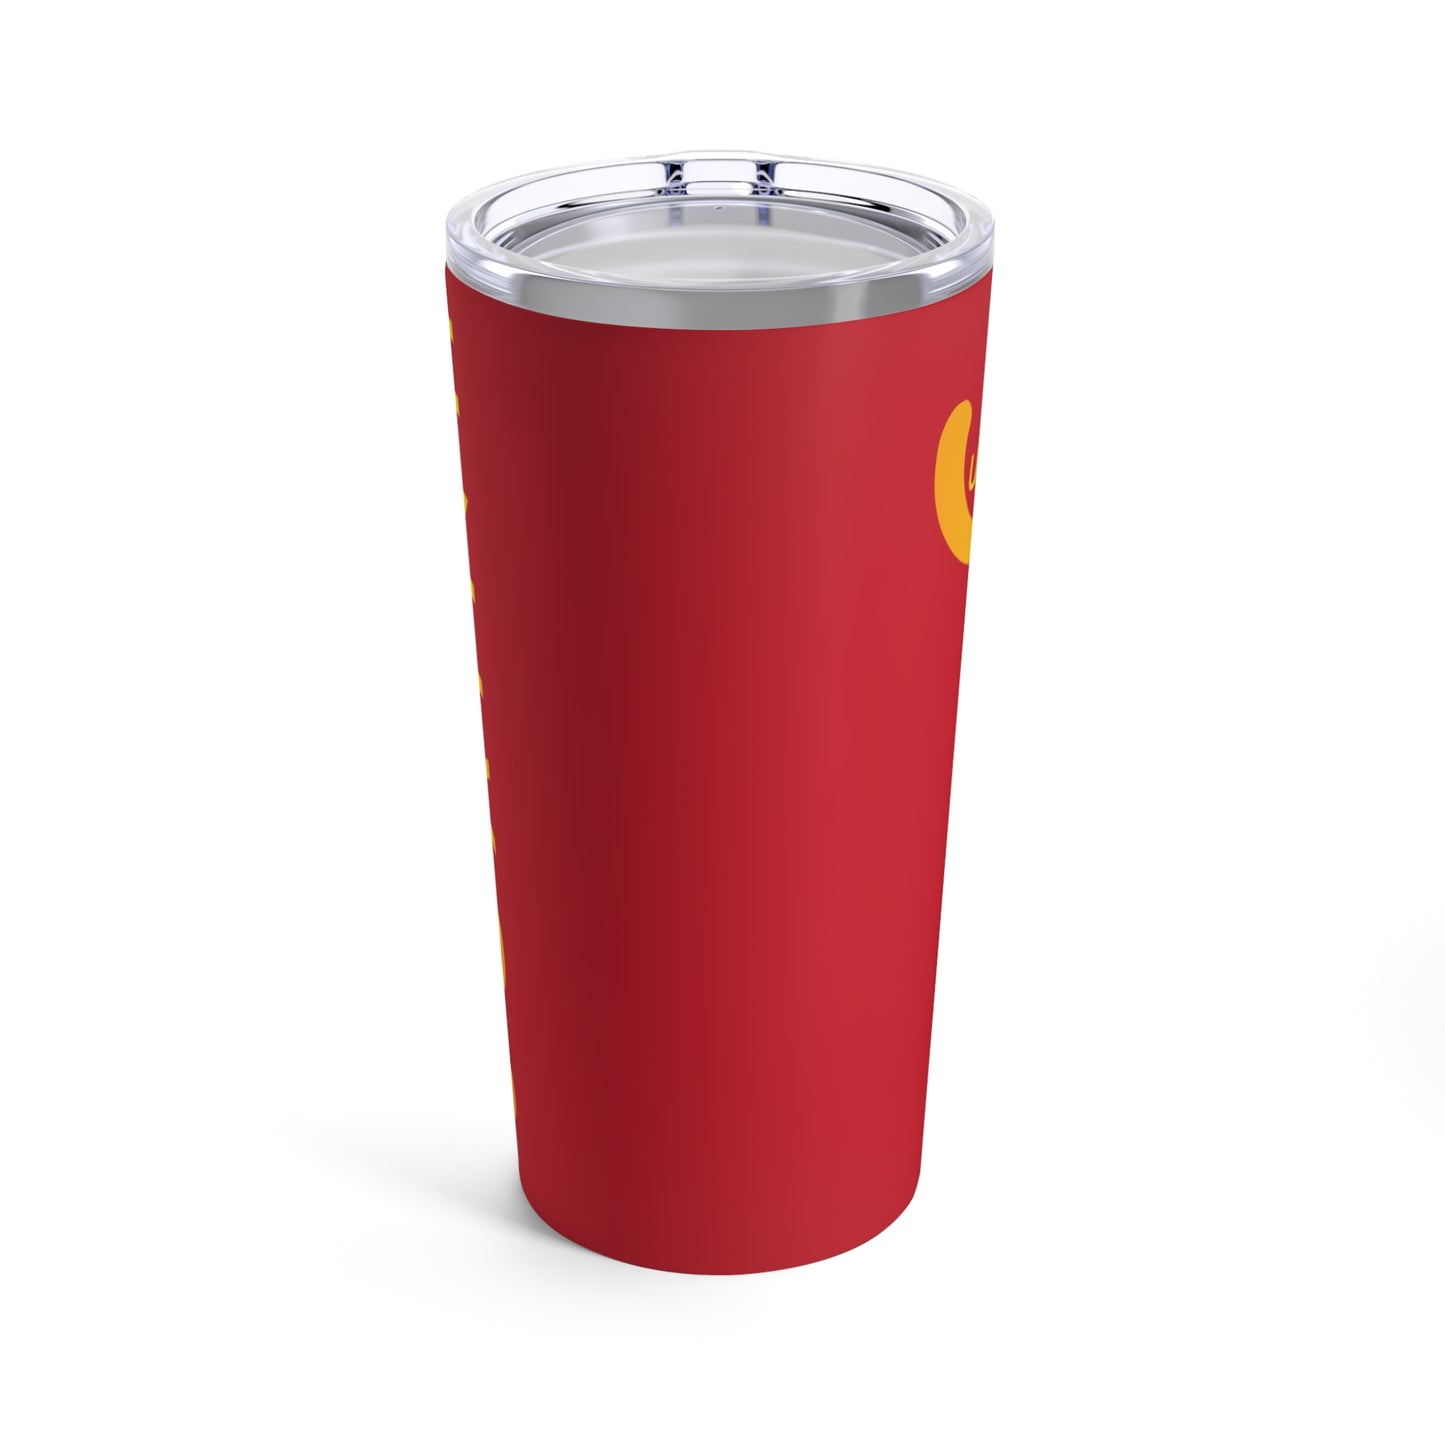 The Red Tumbler 20oz